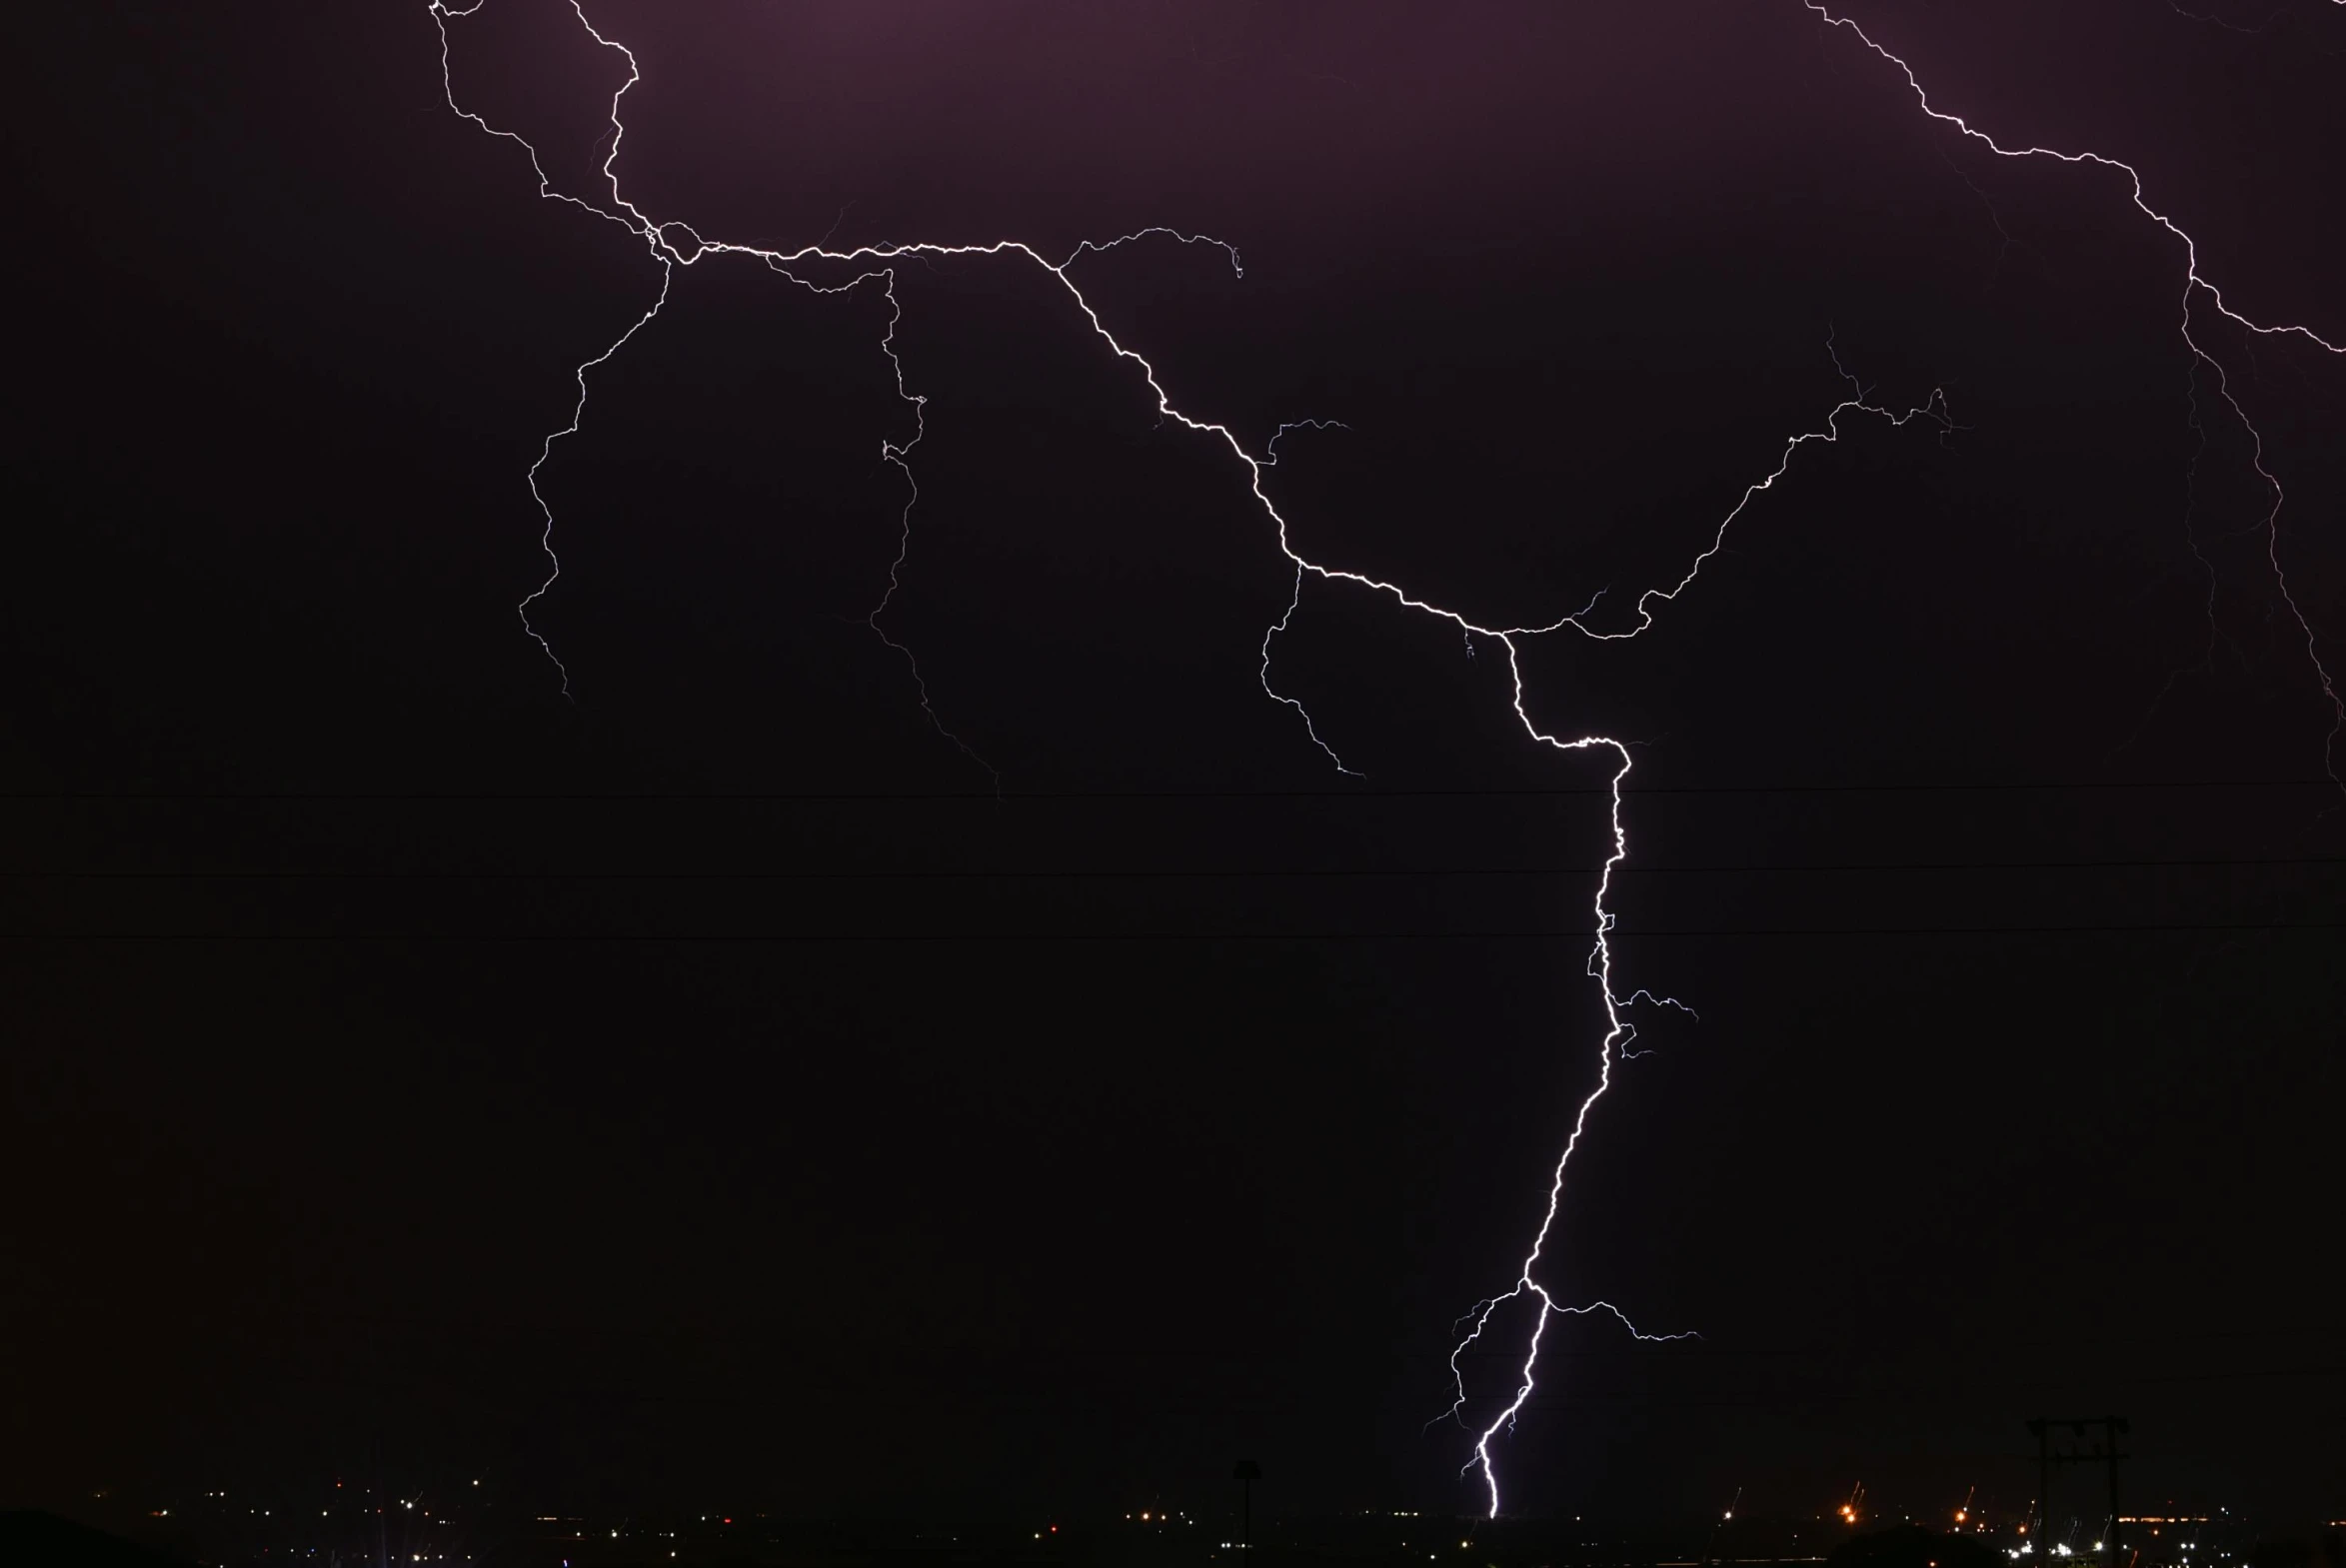 two lightning strikes can be seen in the night sky